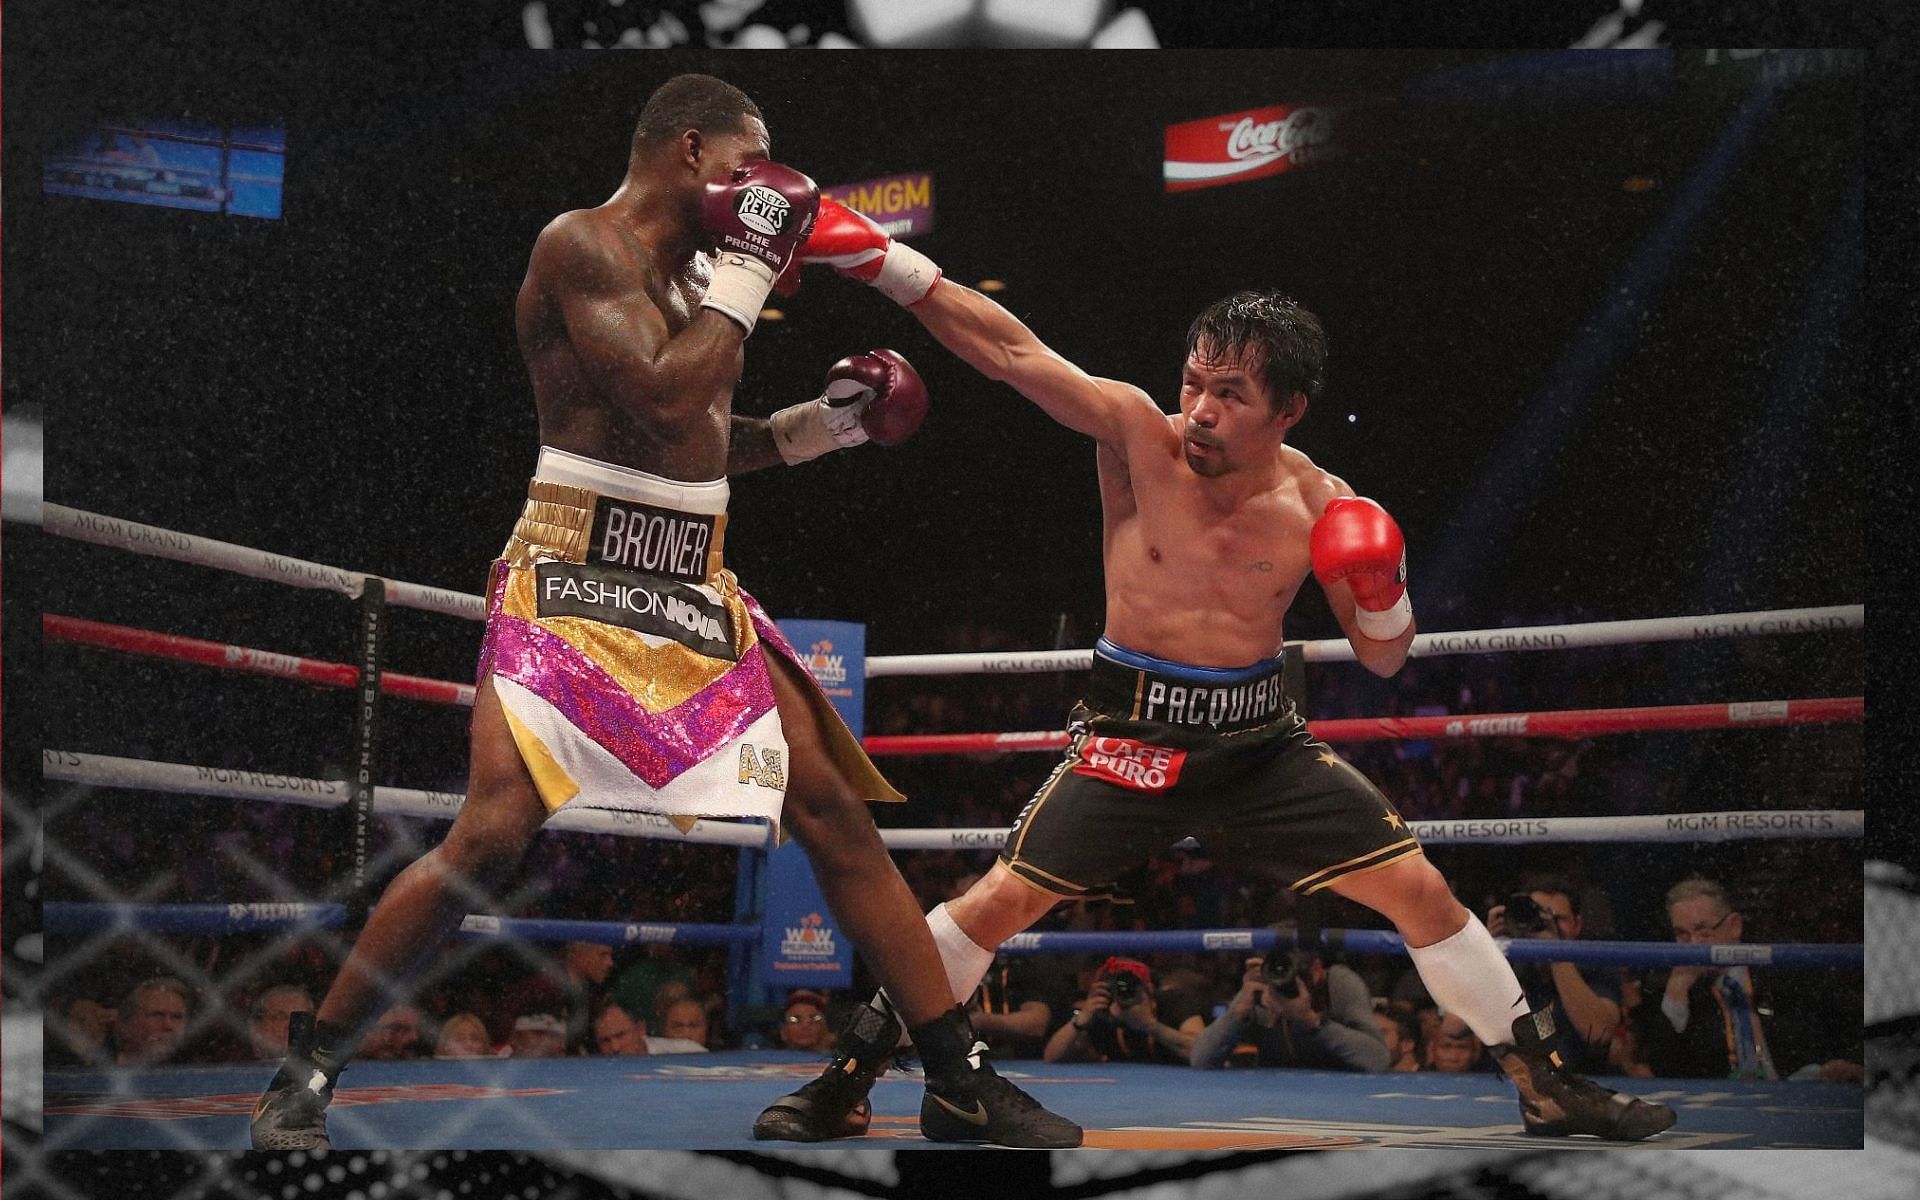 Manny Pacquiao in an impressive southpaw stance during his fight against Adrien Broner. [Image courtesy: Getty]